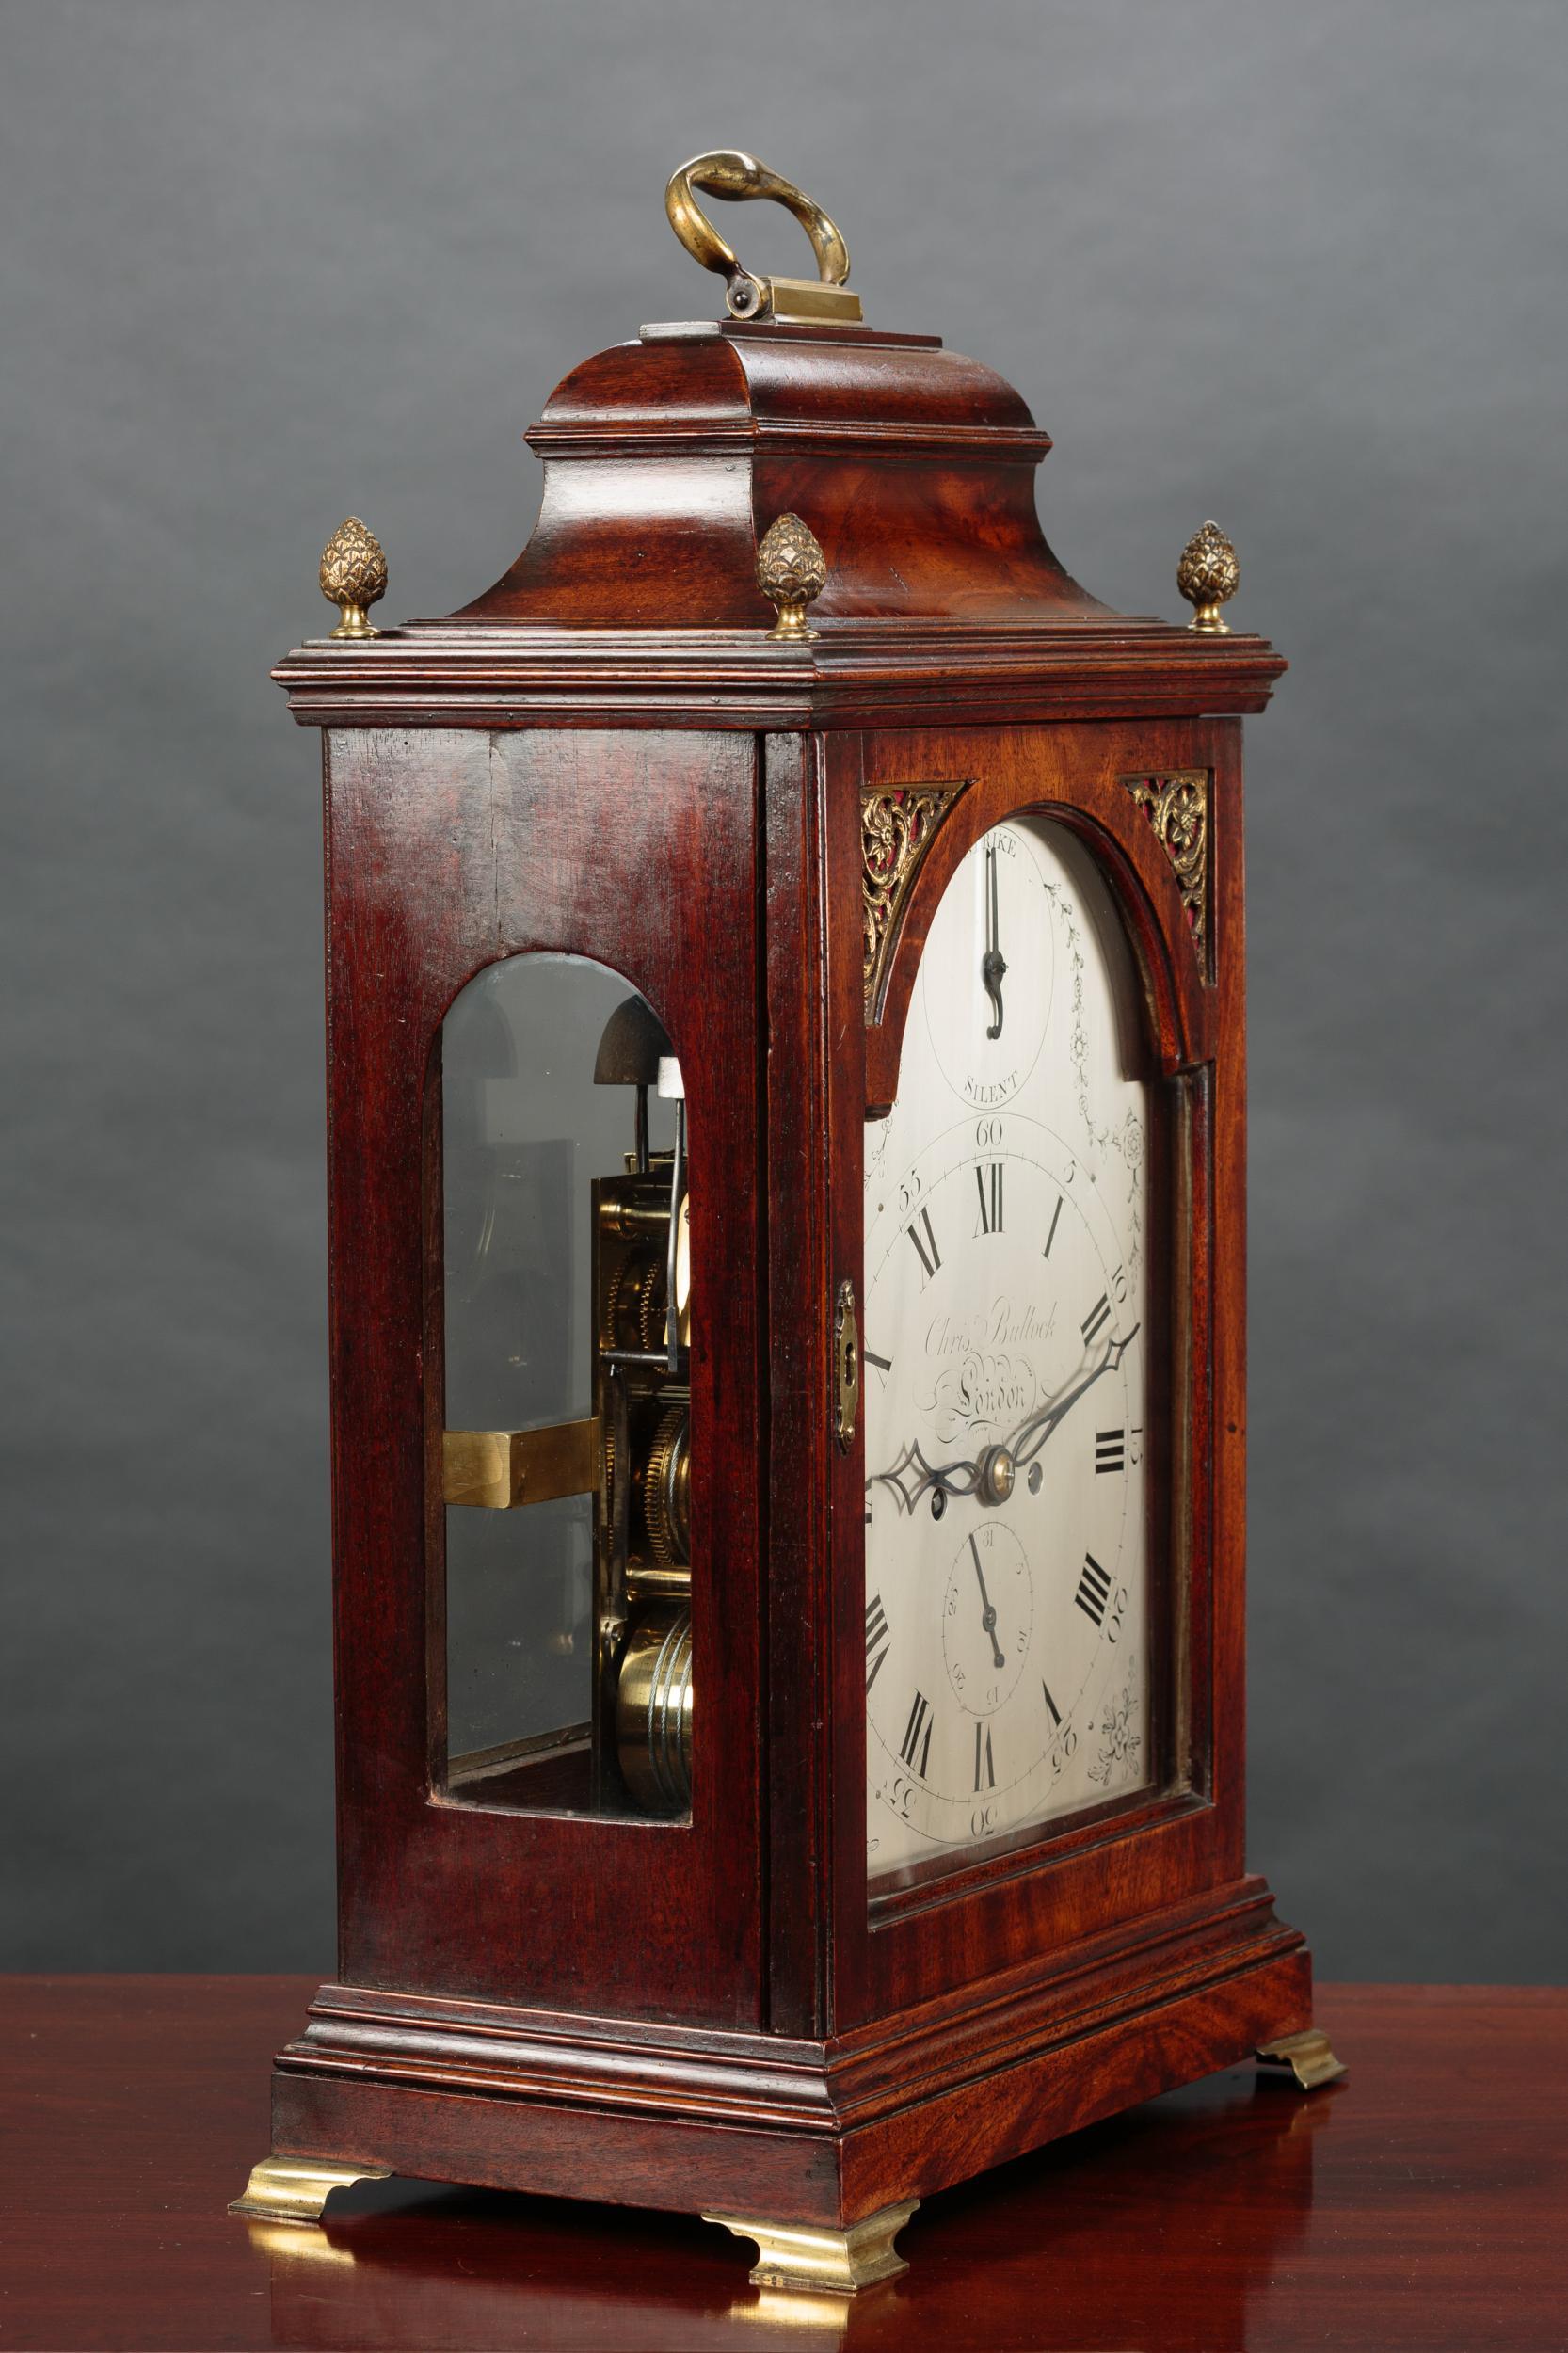 George III bracket clock by Christopher Bullock, London

Finely figured mahogany bell top case with four ‘pineapple’ finials surmounted by a hinged carrying handle standing on a stepped, raised plinth and resting on four outswept brass bracket